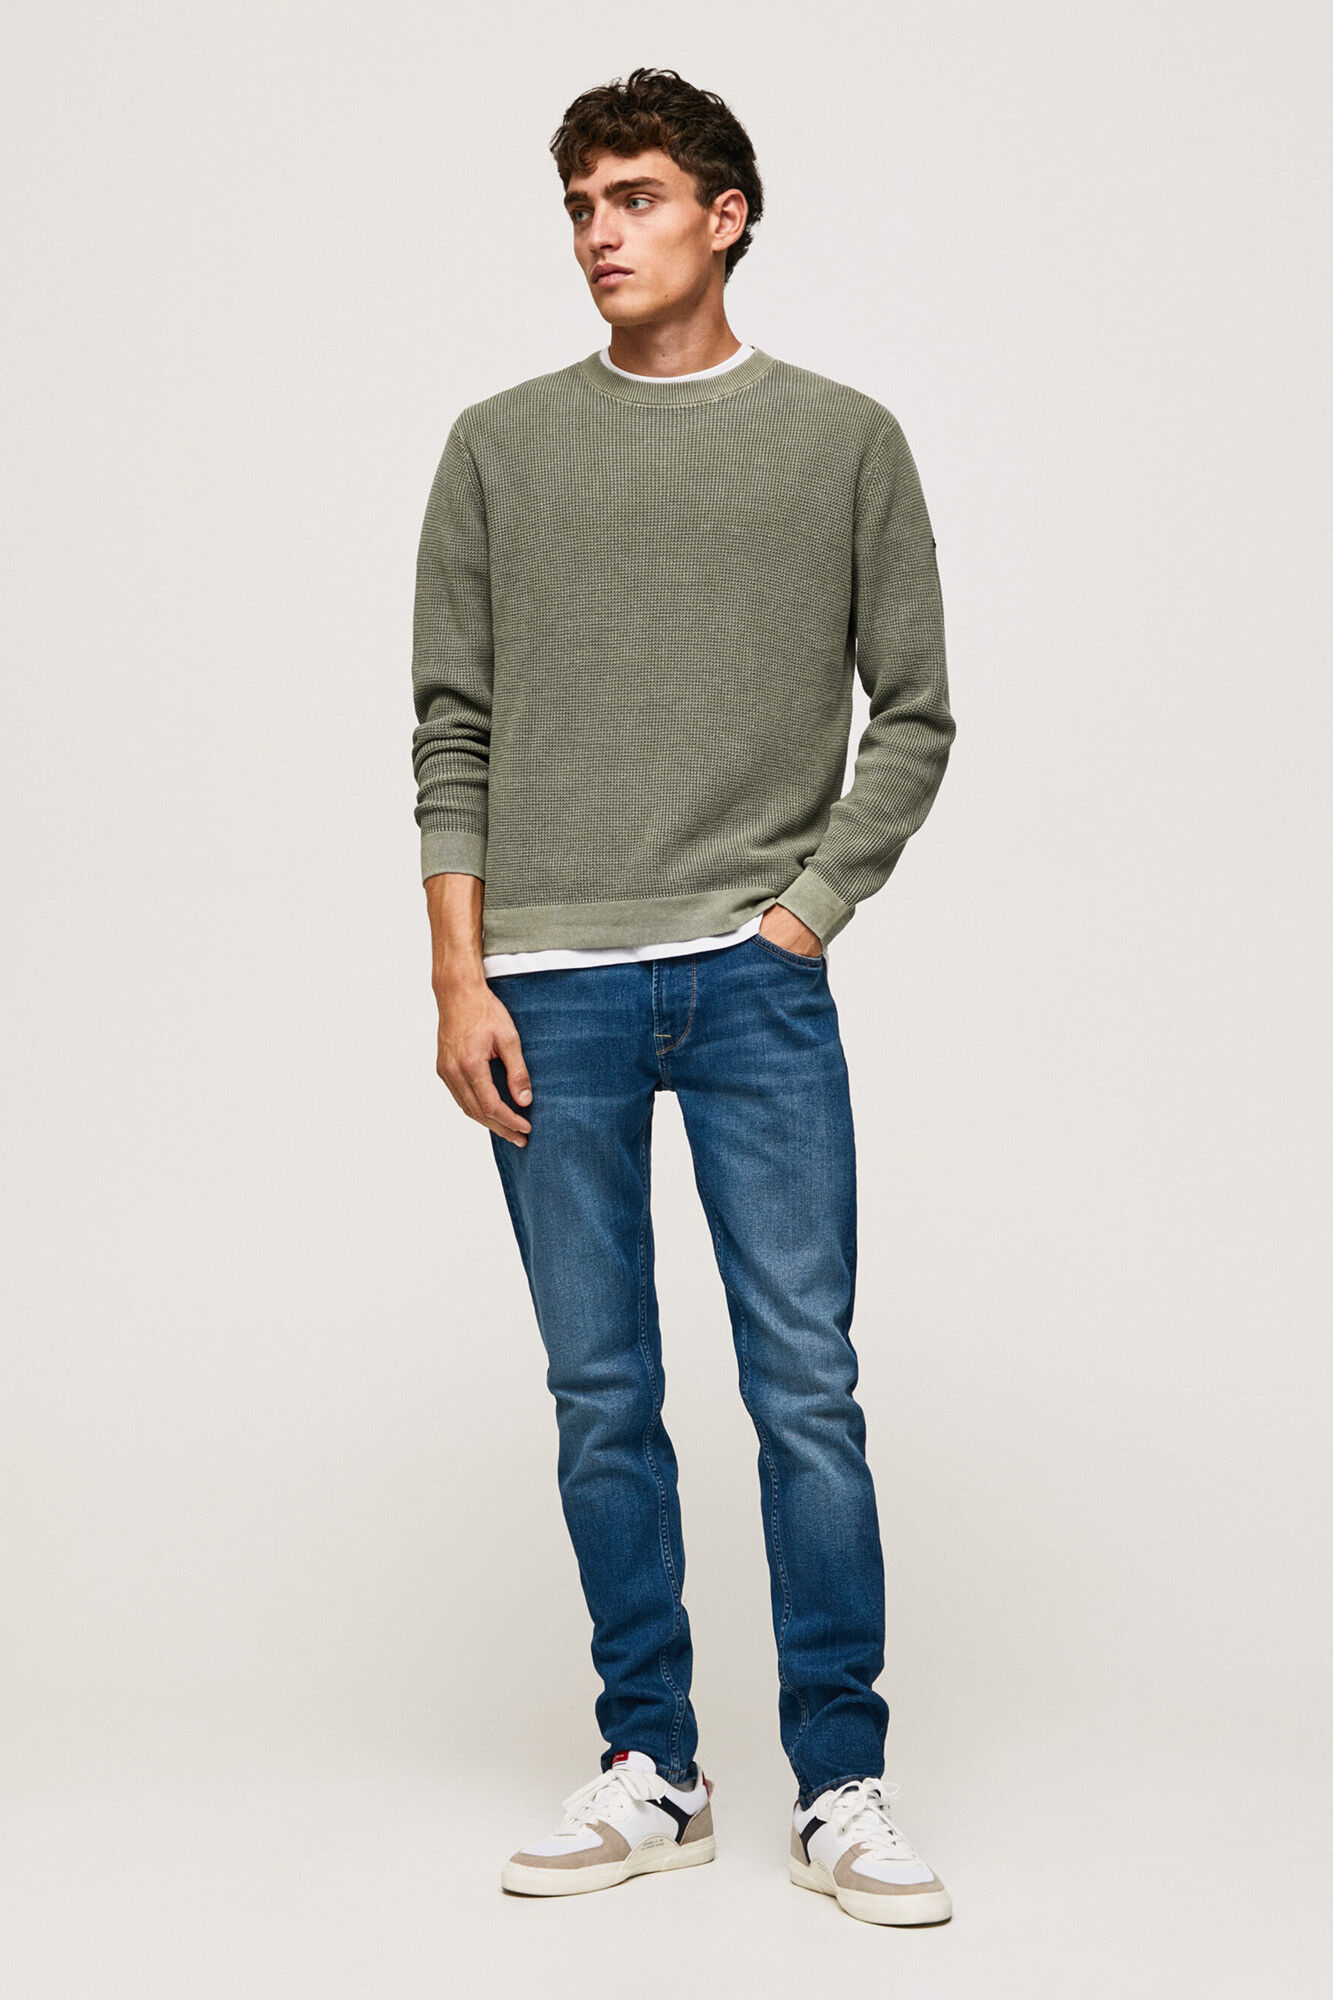 Pepe Jeans Cargo Trousers - Buy Pepe Jeans Cargo Trousers online in India